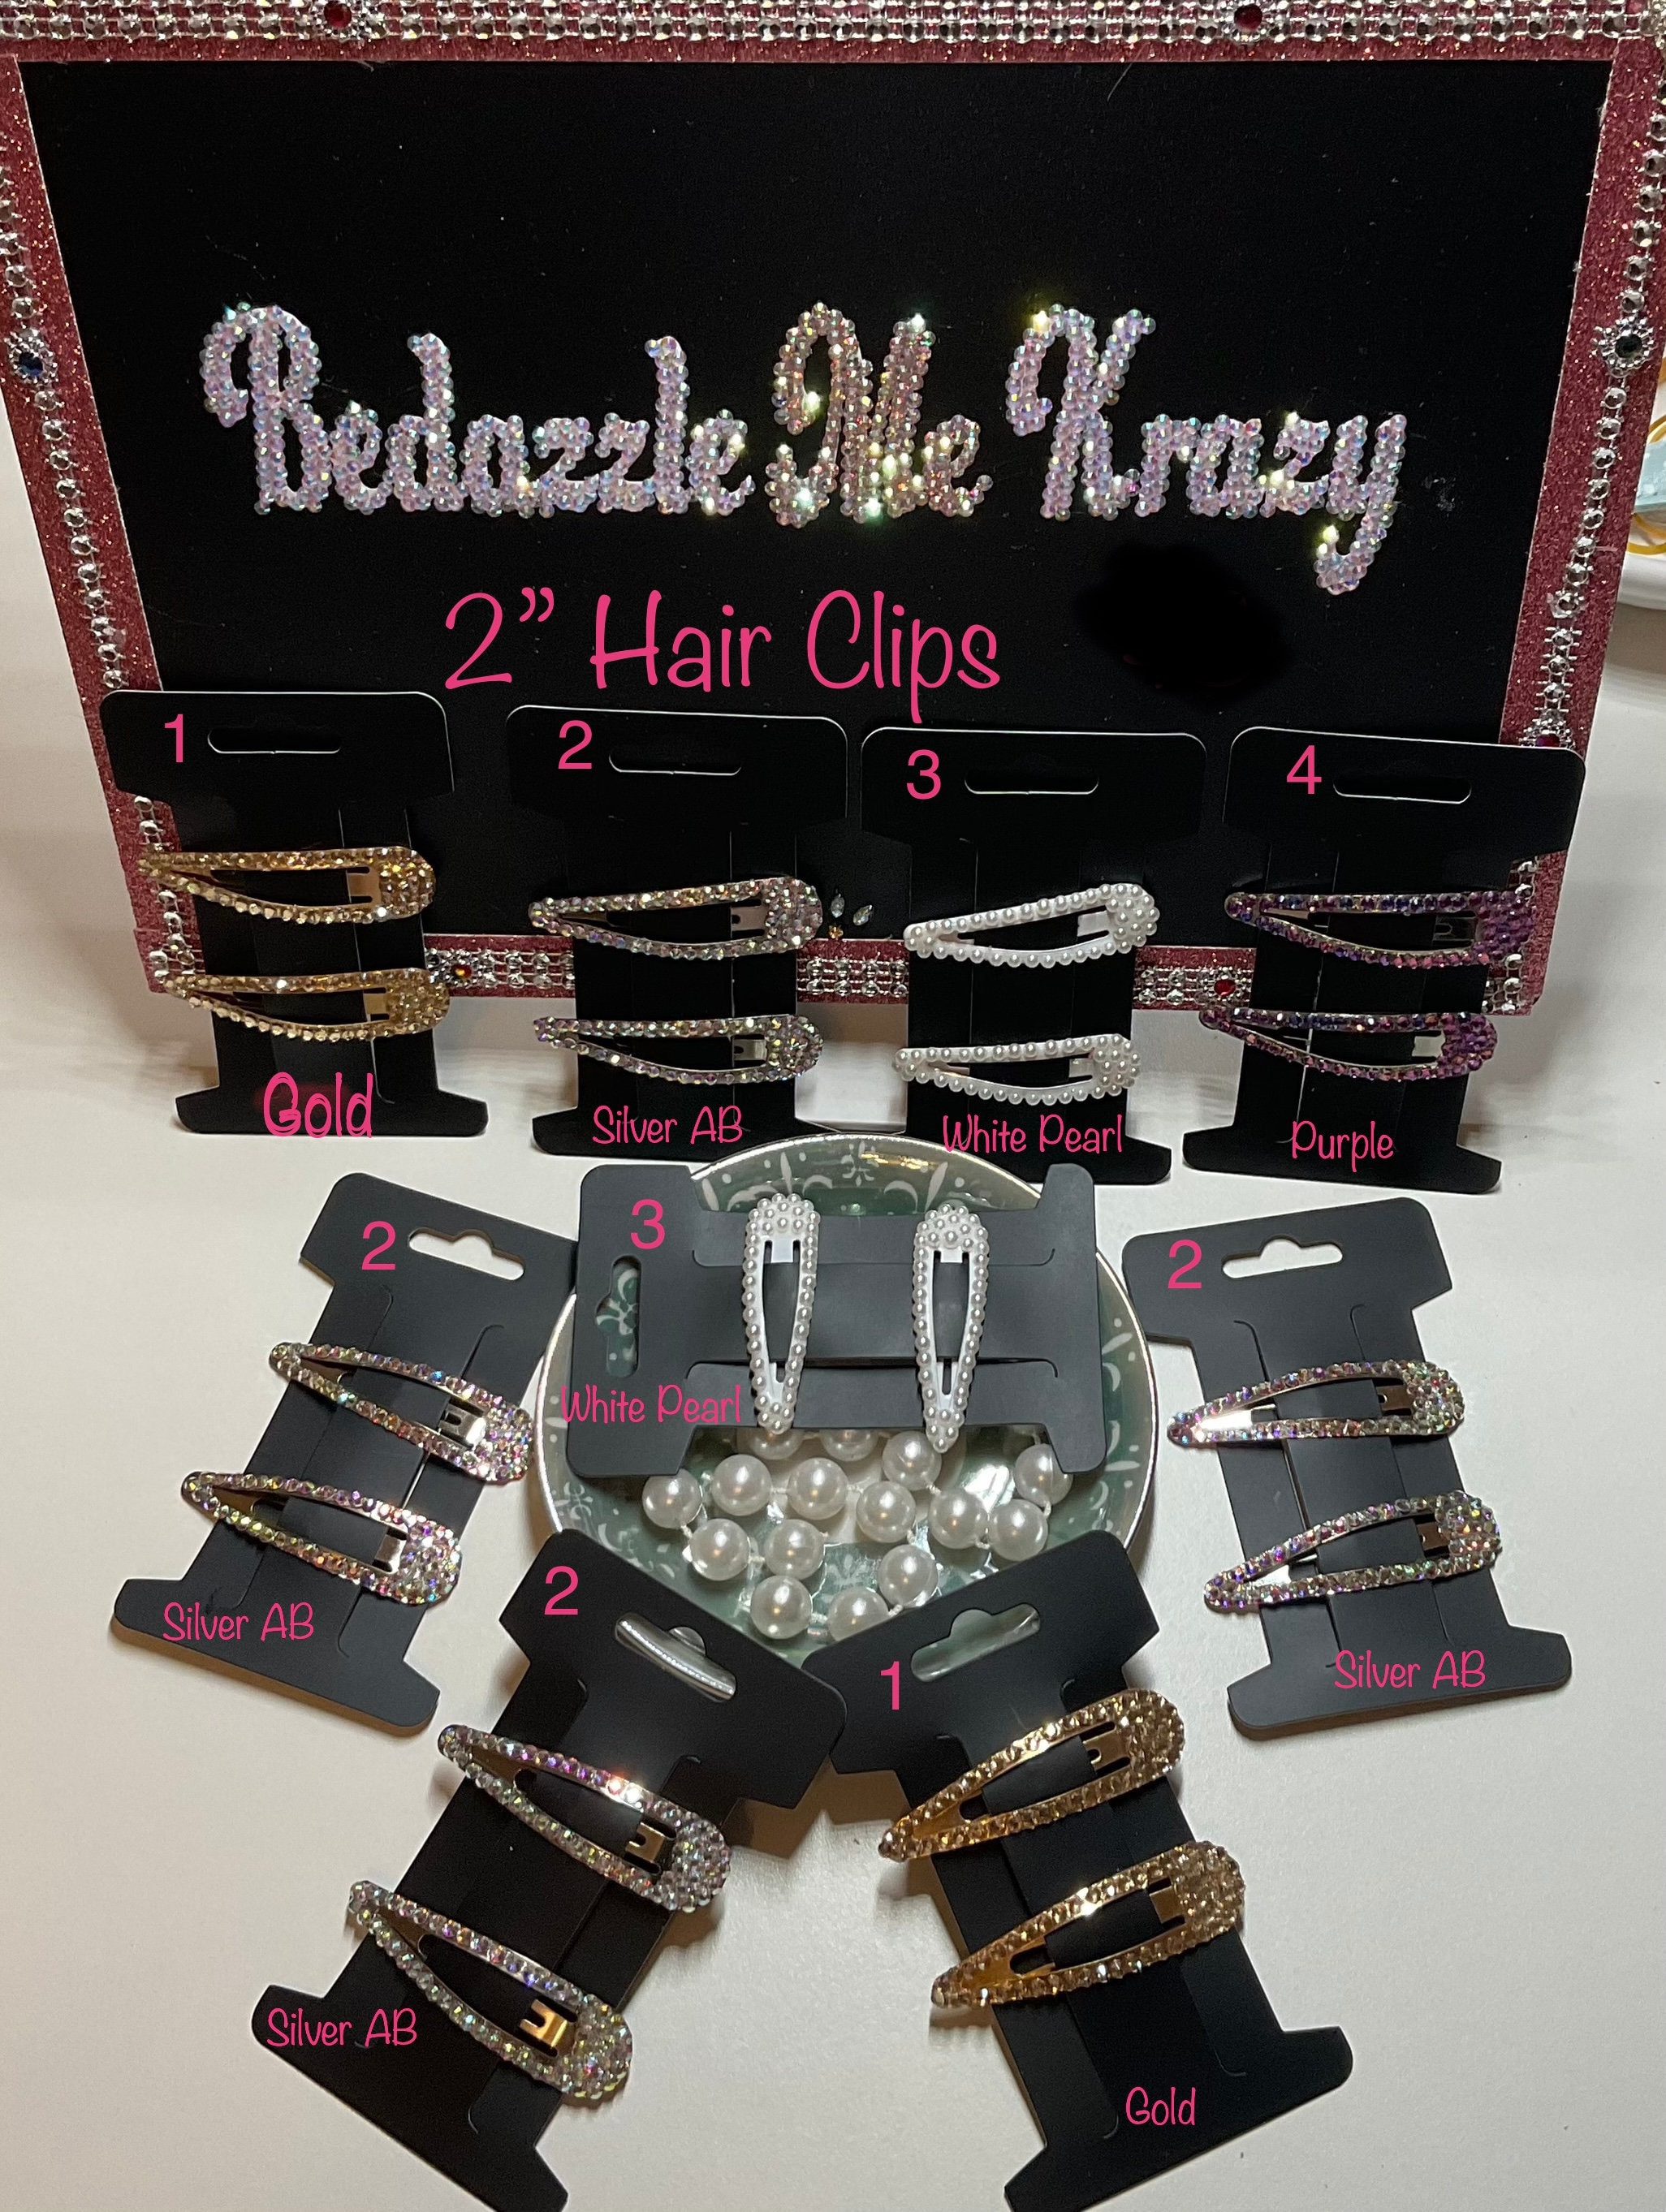 How Do I Bedazzle My Hair?